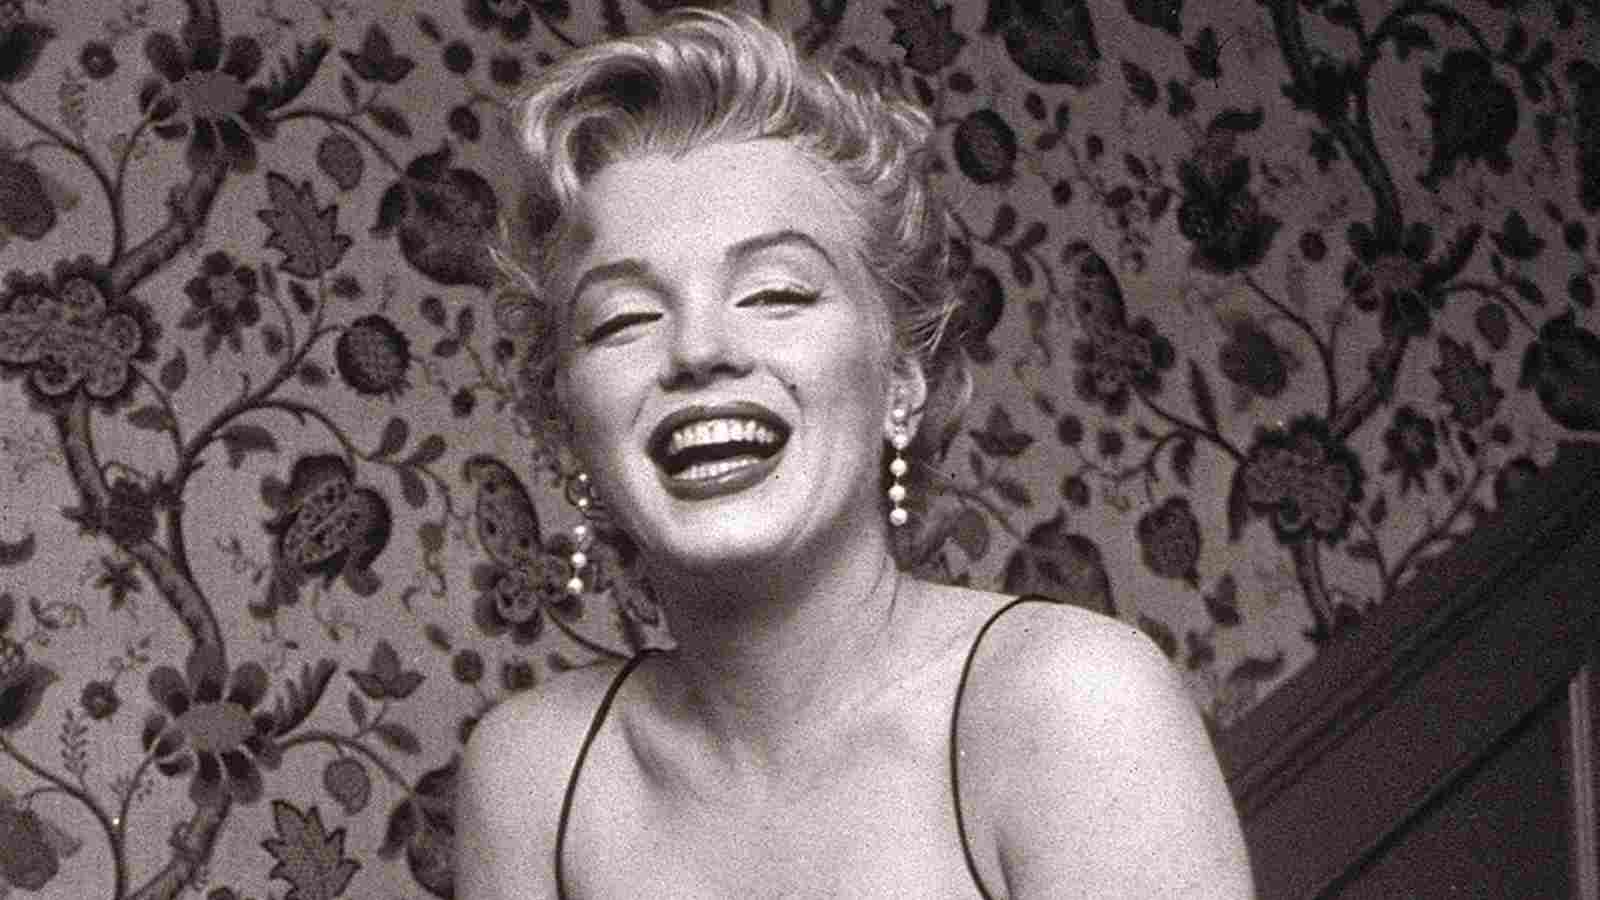 Who did Marilyn Monroe give off her fortunes and estates to?